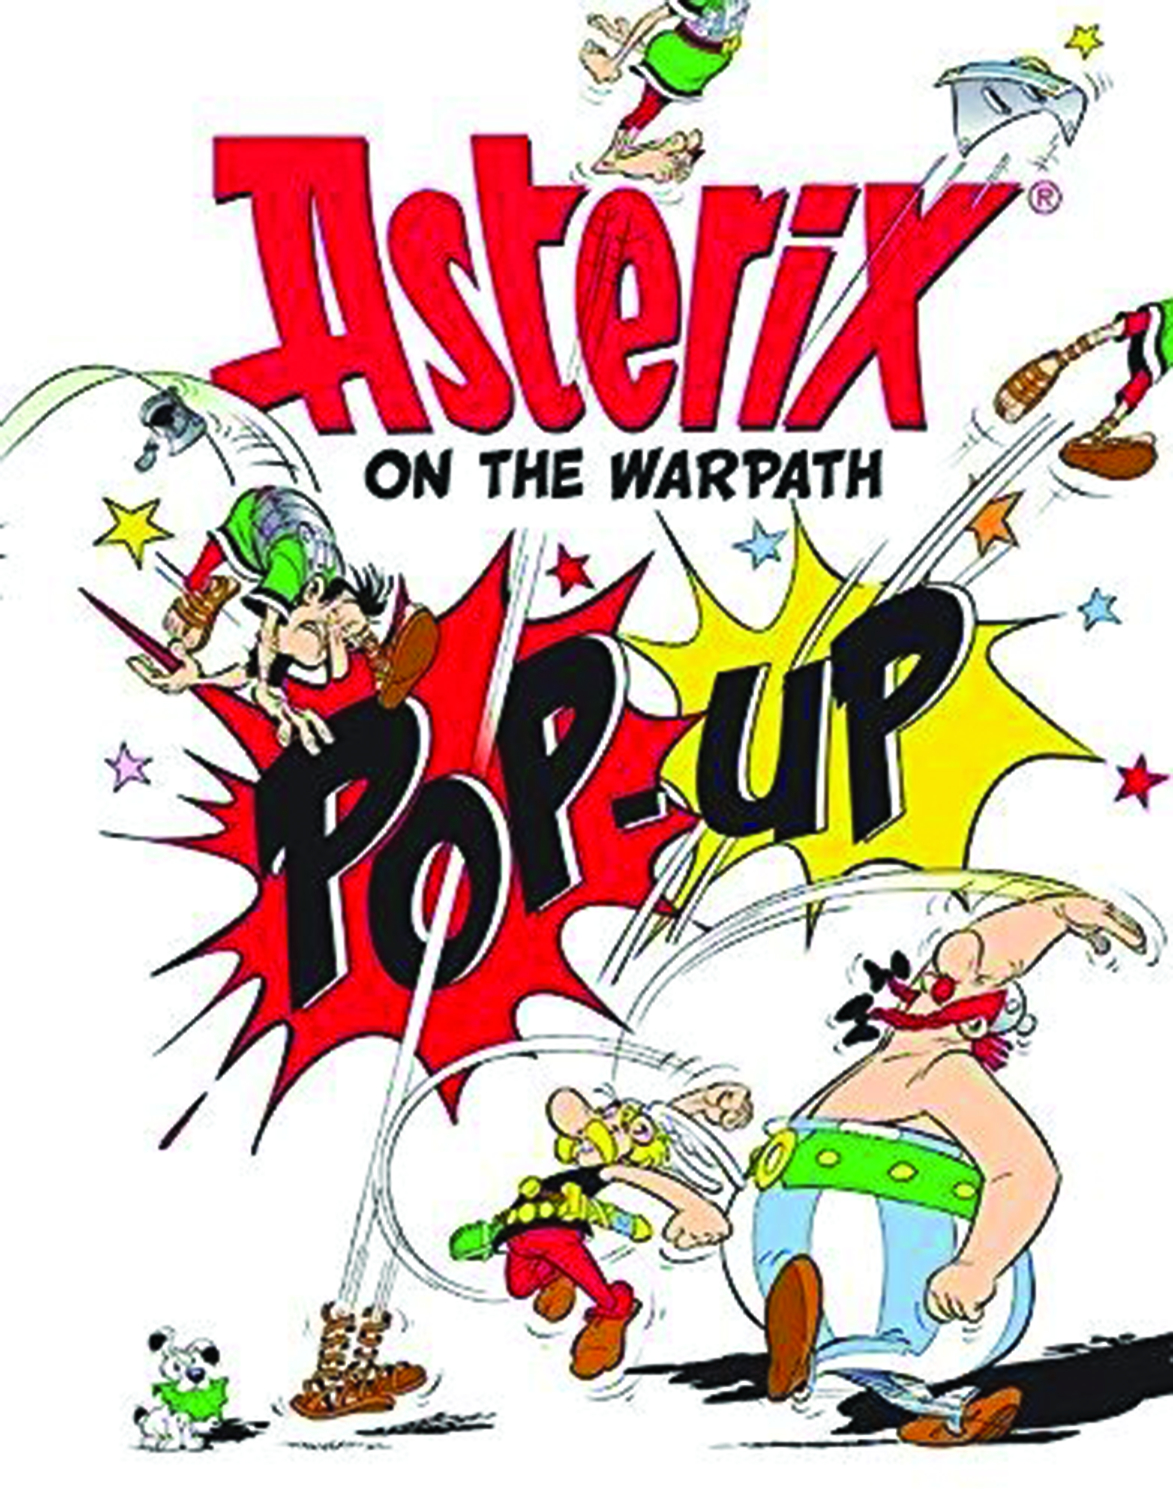 ASTERIX ON THE WARPATH POP UP BOOK HC (PP #1191)